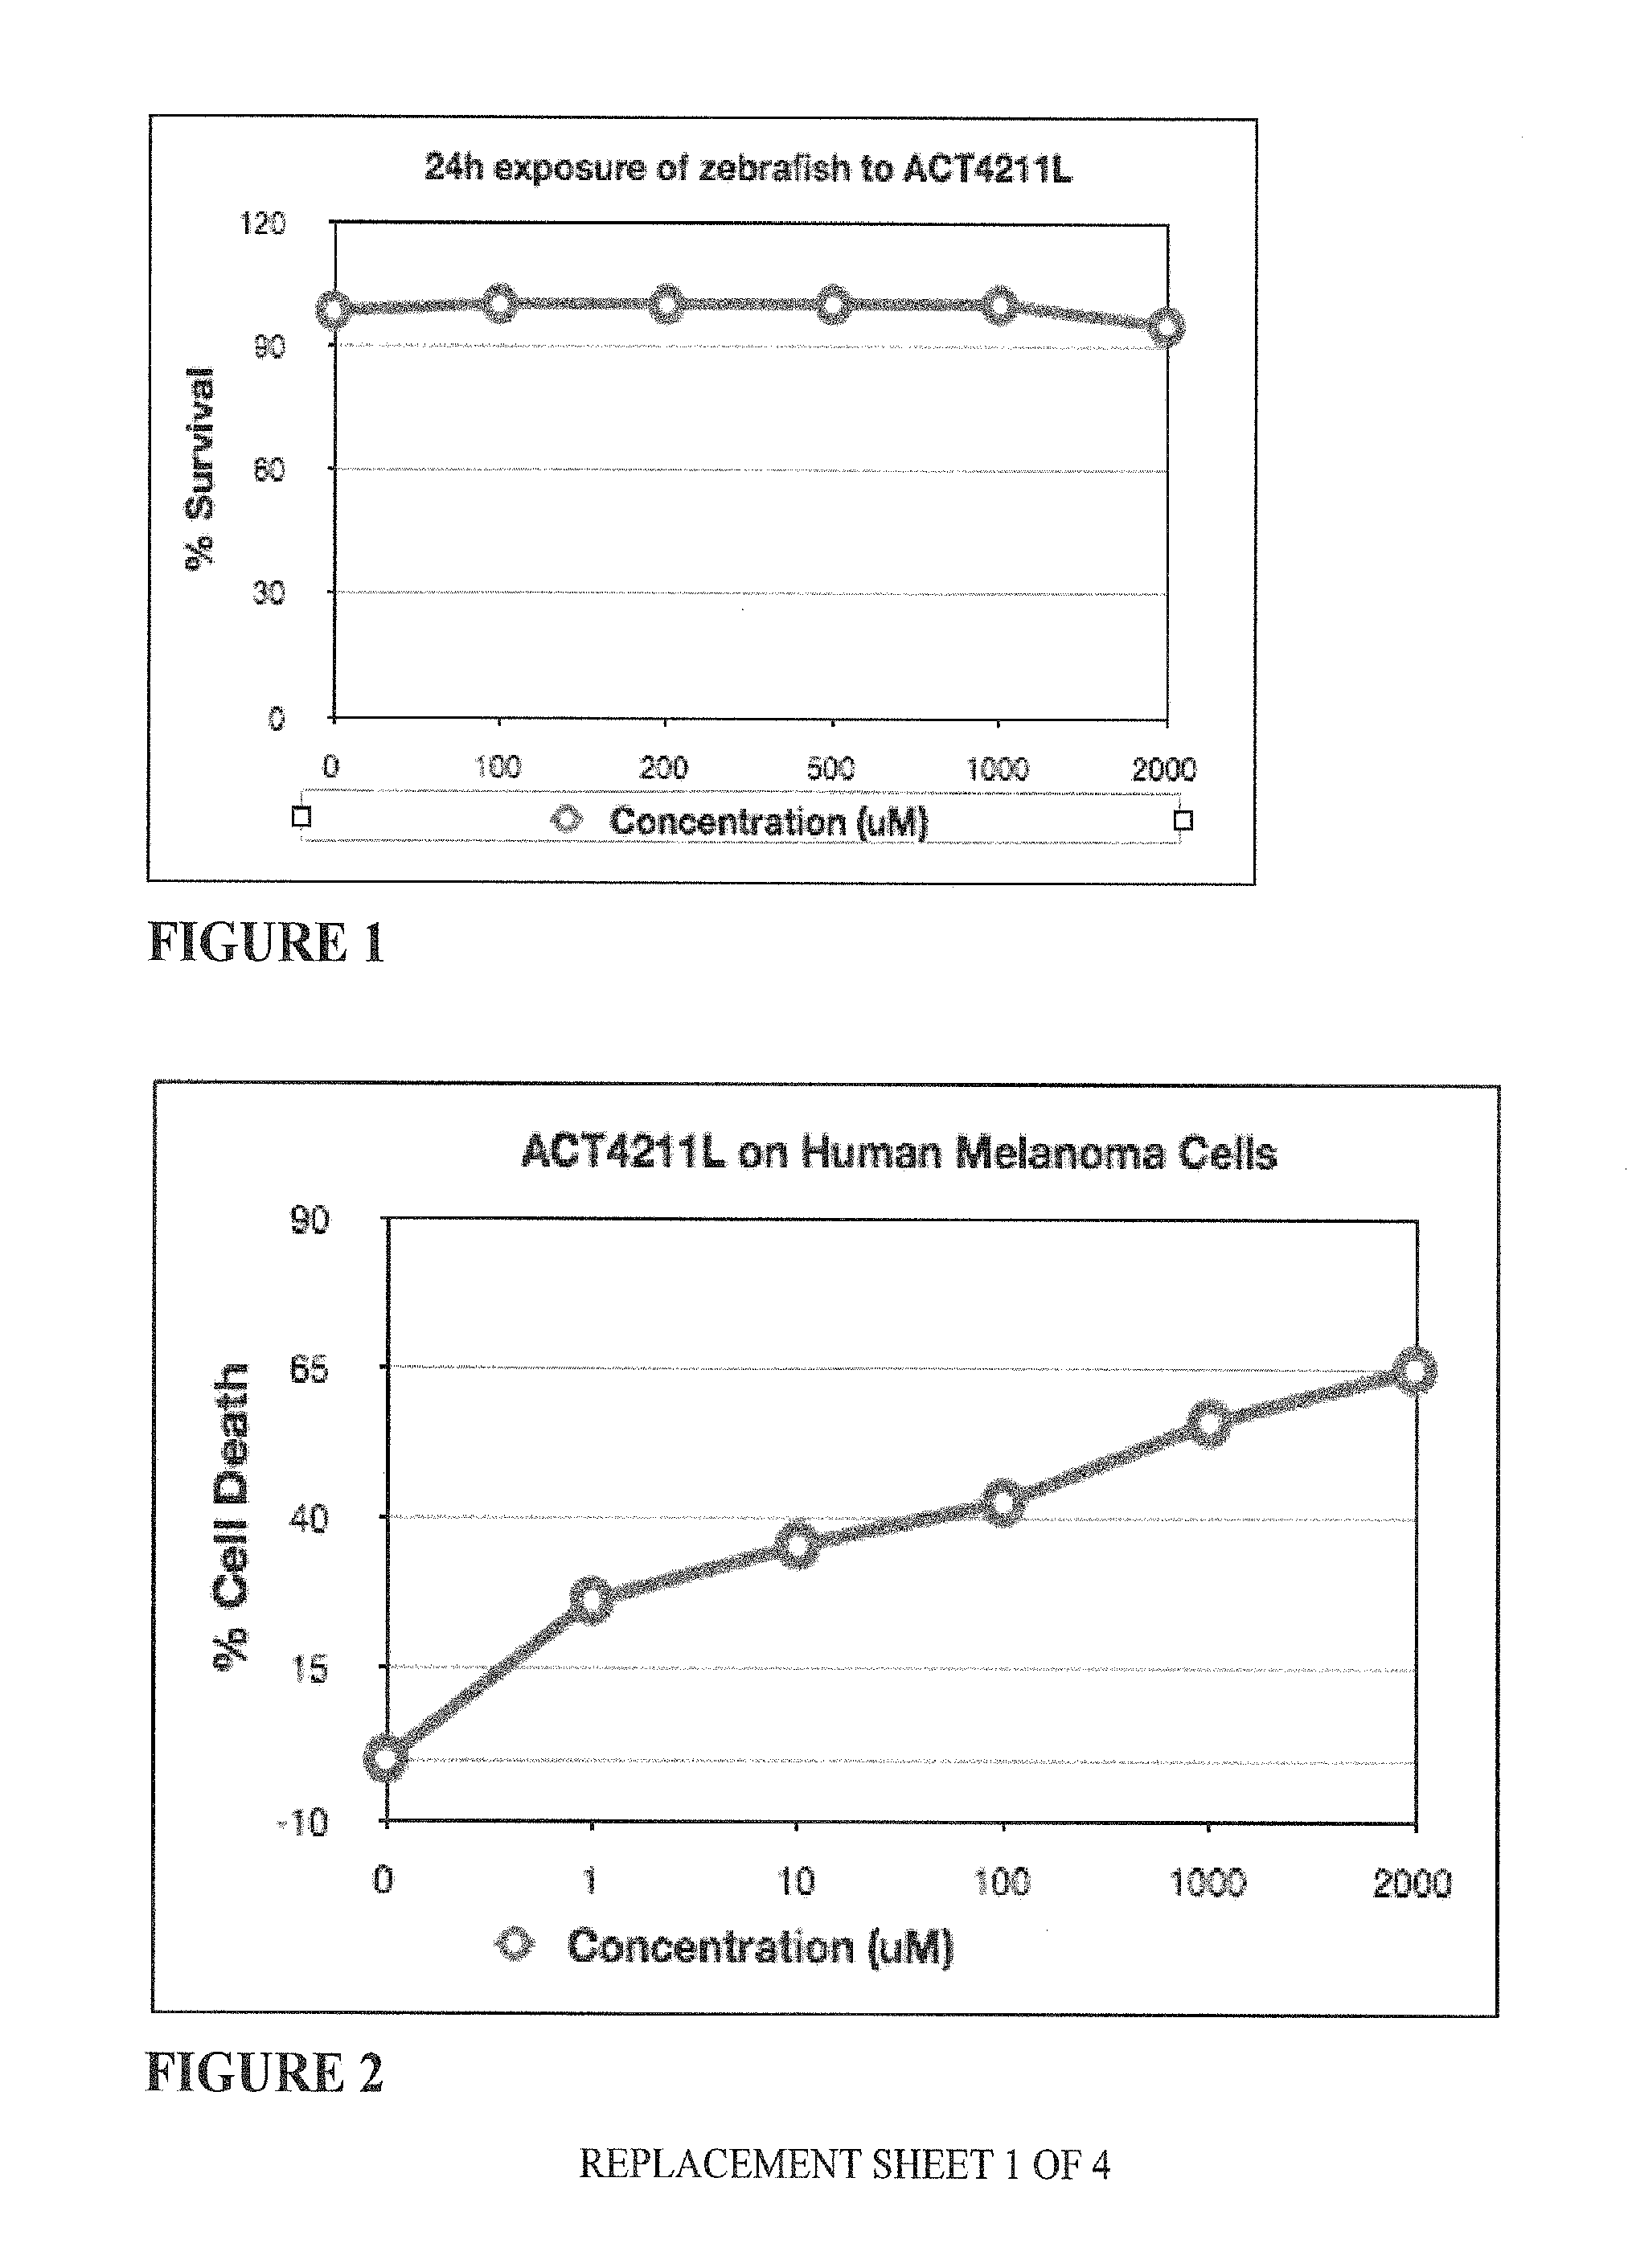 Disease detection and treatment through activation of compounds using external energy